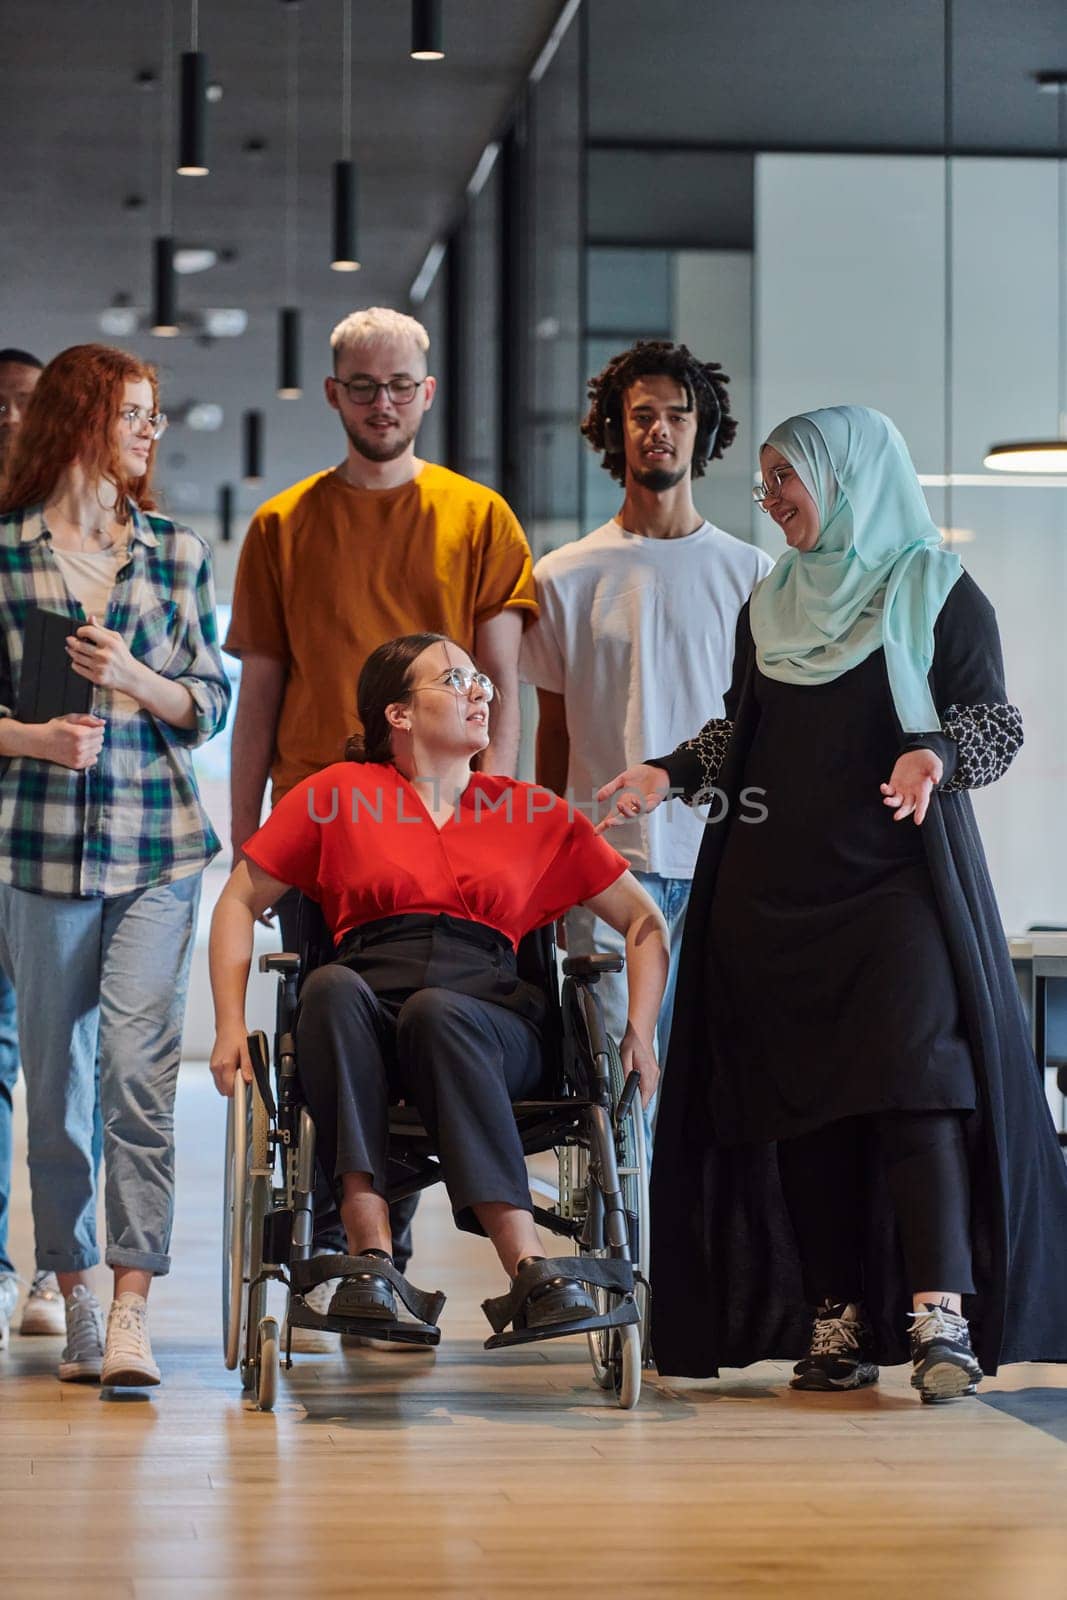 A diverse group of young business people walking a corridor in the glass-enclosed office of a modern startup, including a person in a wheelchair and a woman wearing a hijab, showing a dynamic mix of innovation and unity. by dotshock